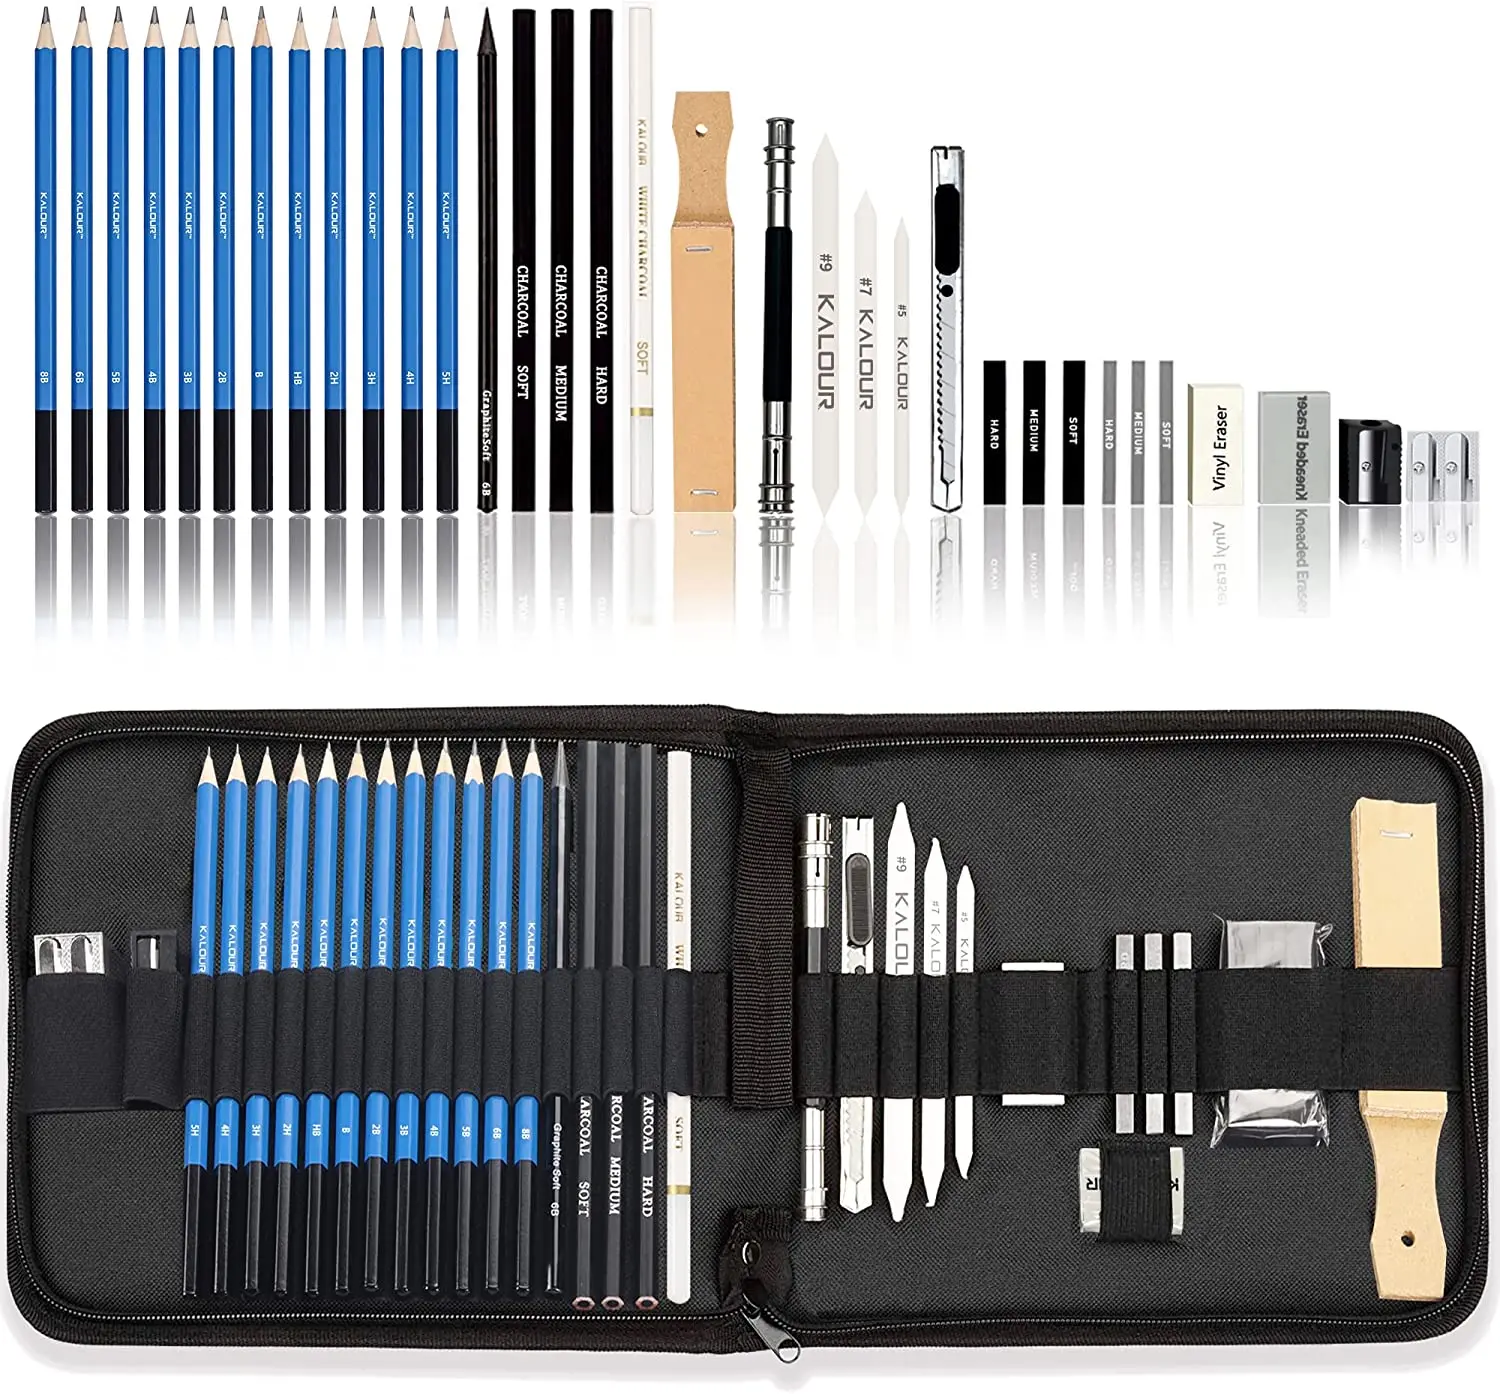 33 Pieces Pro Drawing Kit Sketching Pencils Set,Portable Zippered Travel Case-Charcoal Pencils, Sketch Pencils, Charcoal Stick,S